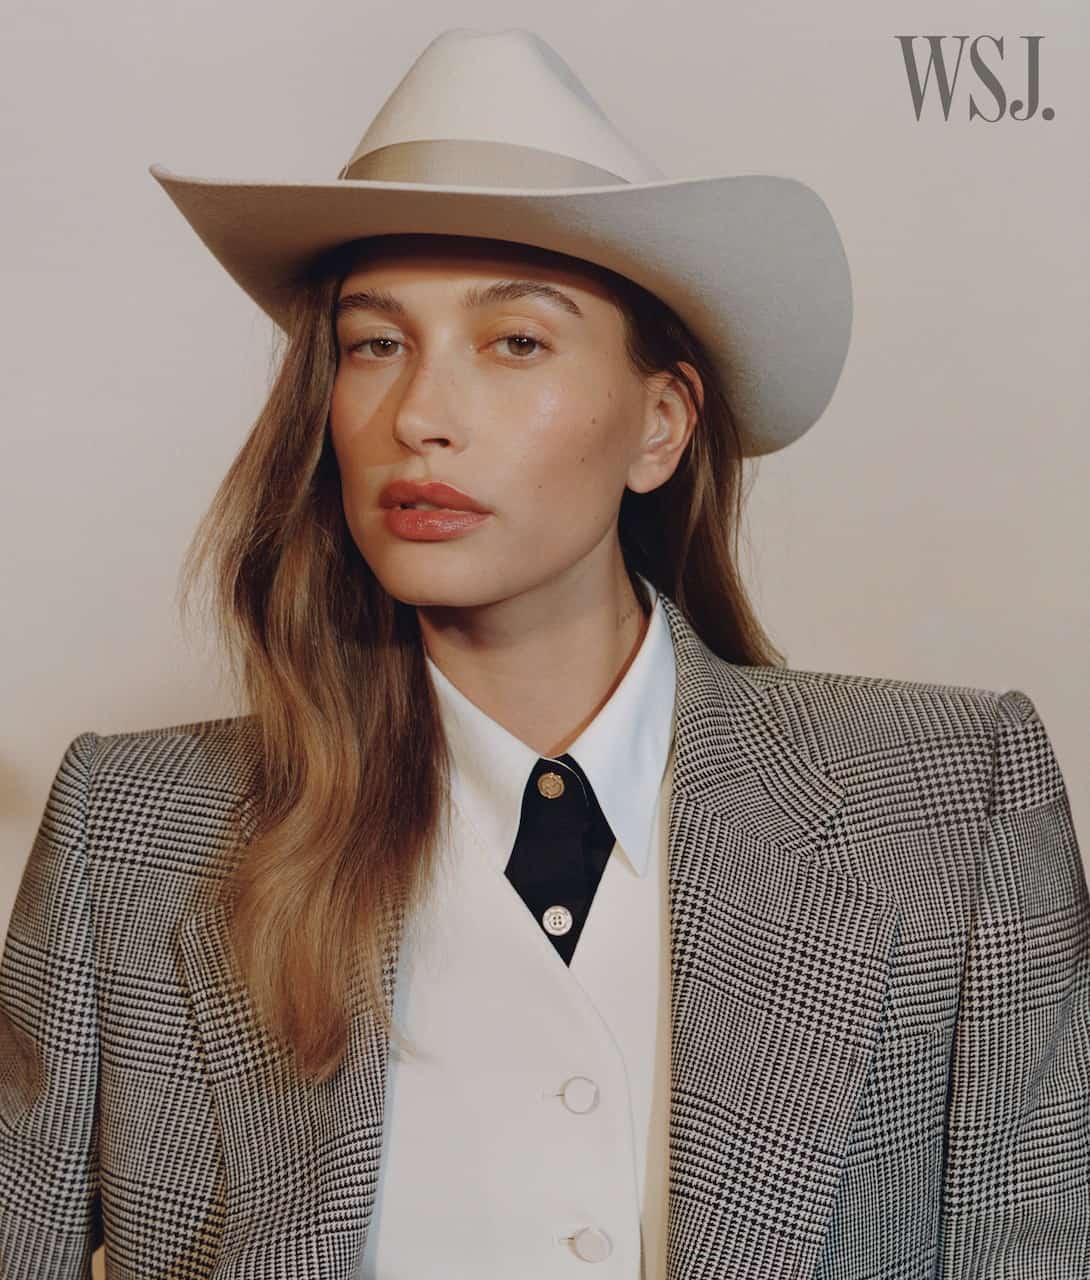 Hailey Bieber on the Cover of WSJ Magazine Women’s Fashion Spring 2022